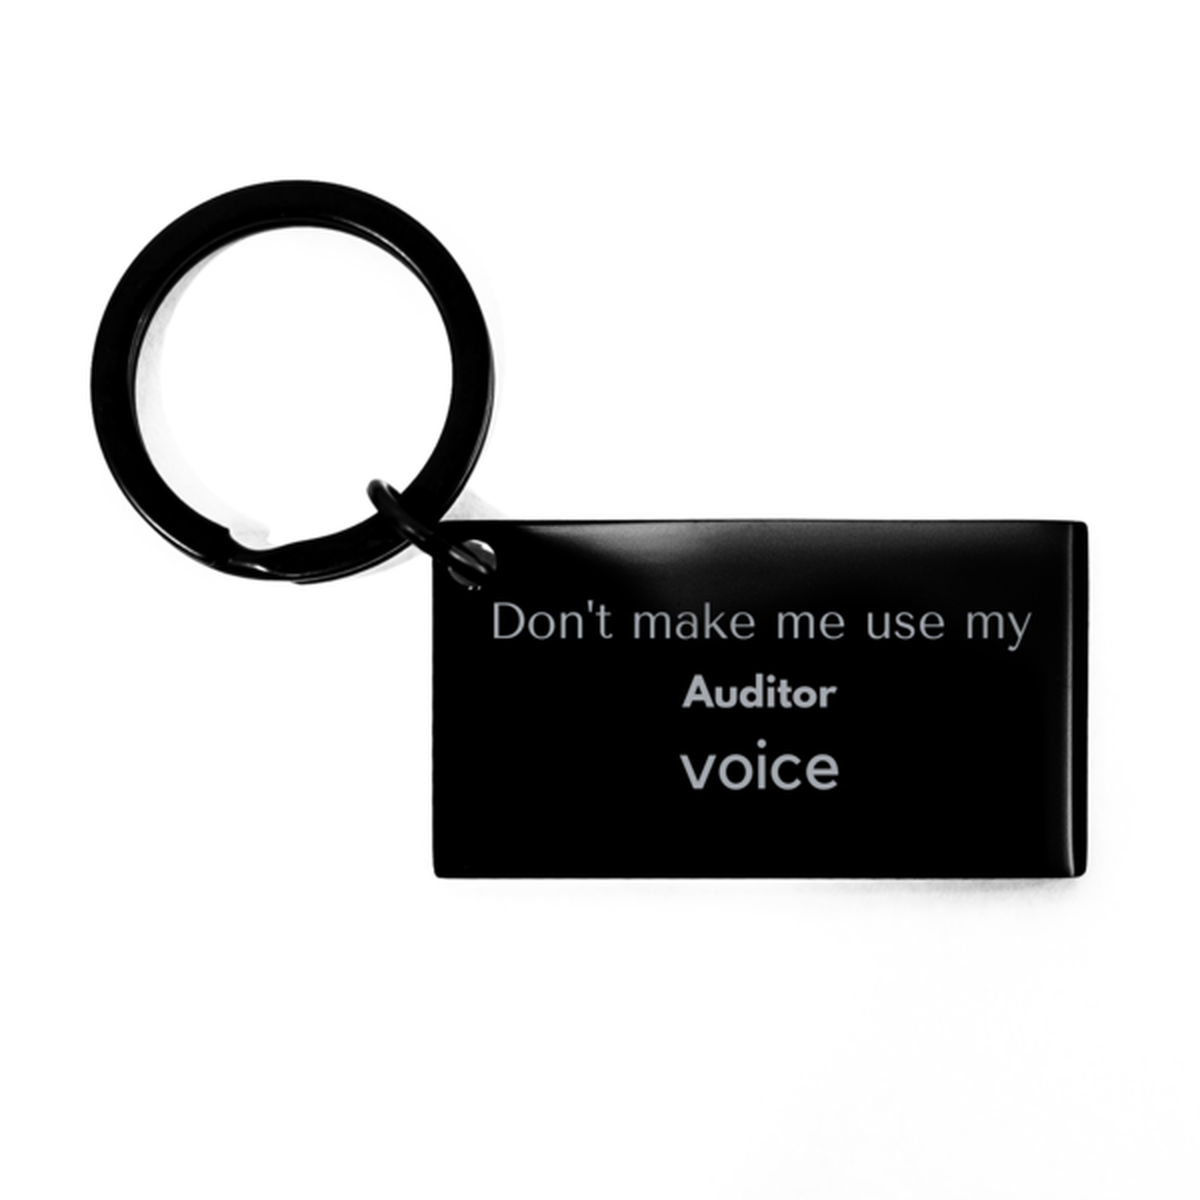 Don't make me use my Auditor voice, Sarcasm Auditor Gifts, Christmas Auditor Keychain Birthday Unique Gifts For Auditor Coworkers, Men, Women, Colleague, Friends